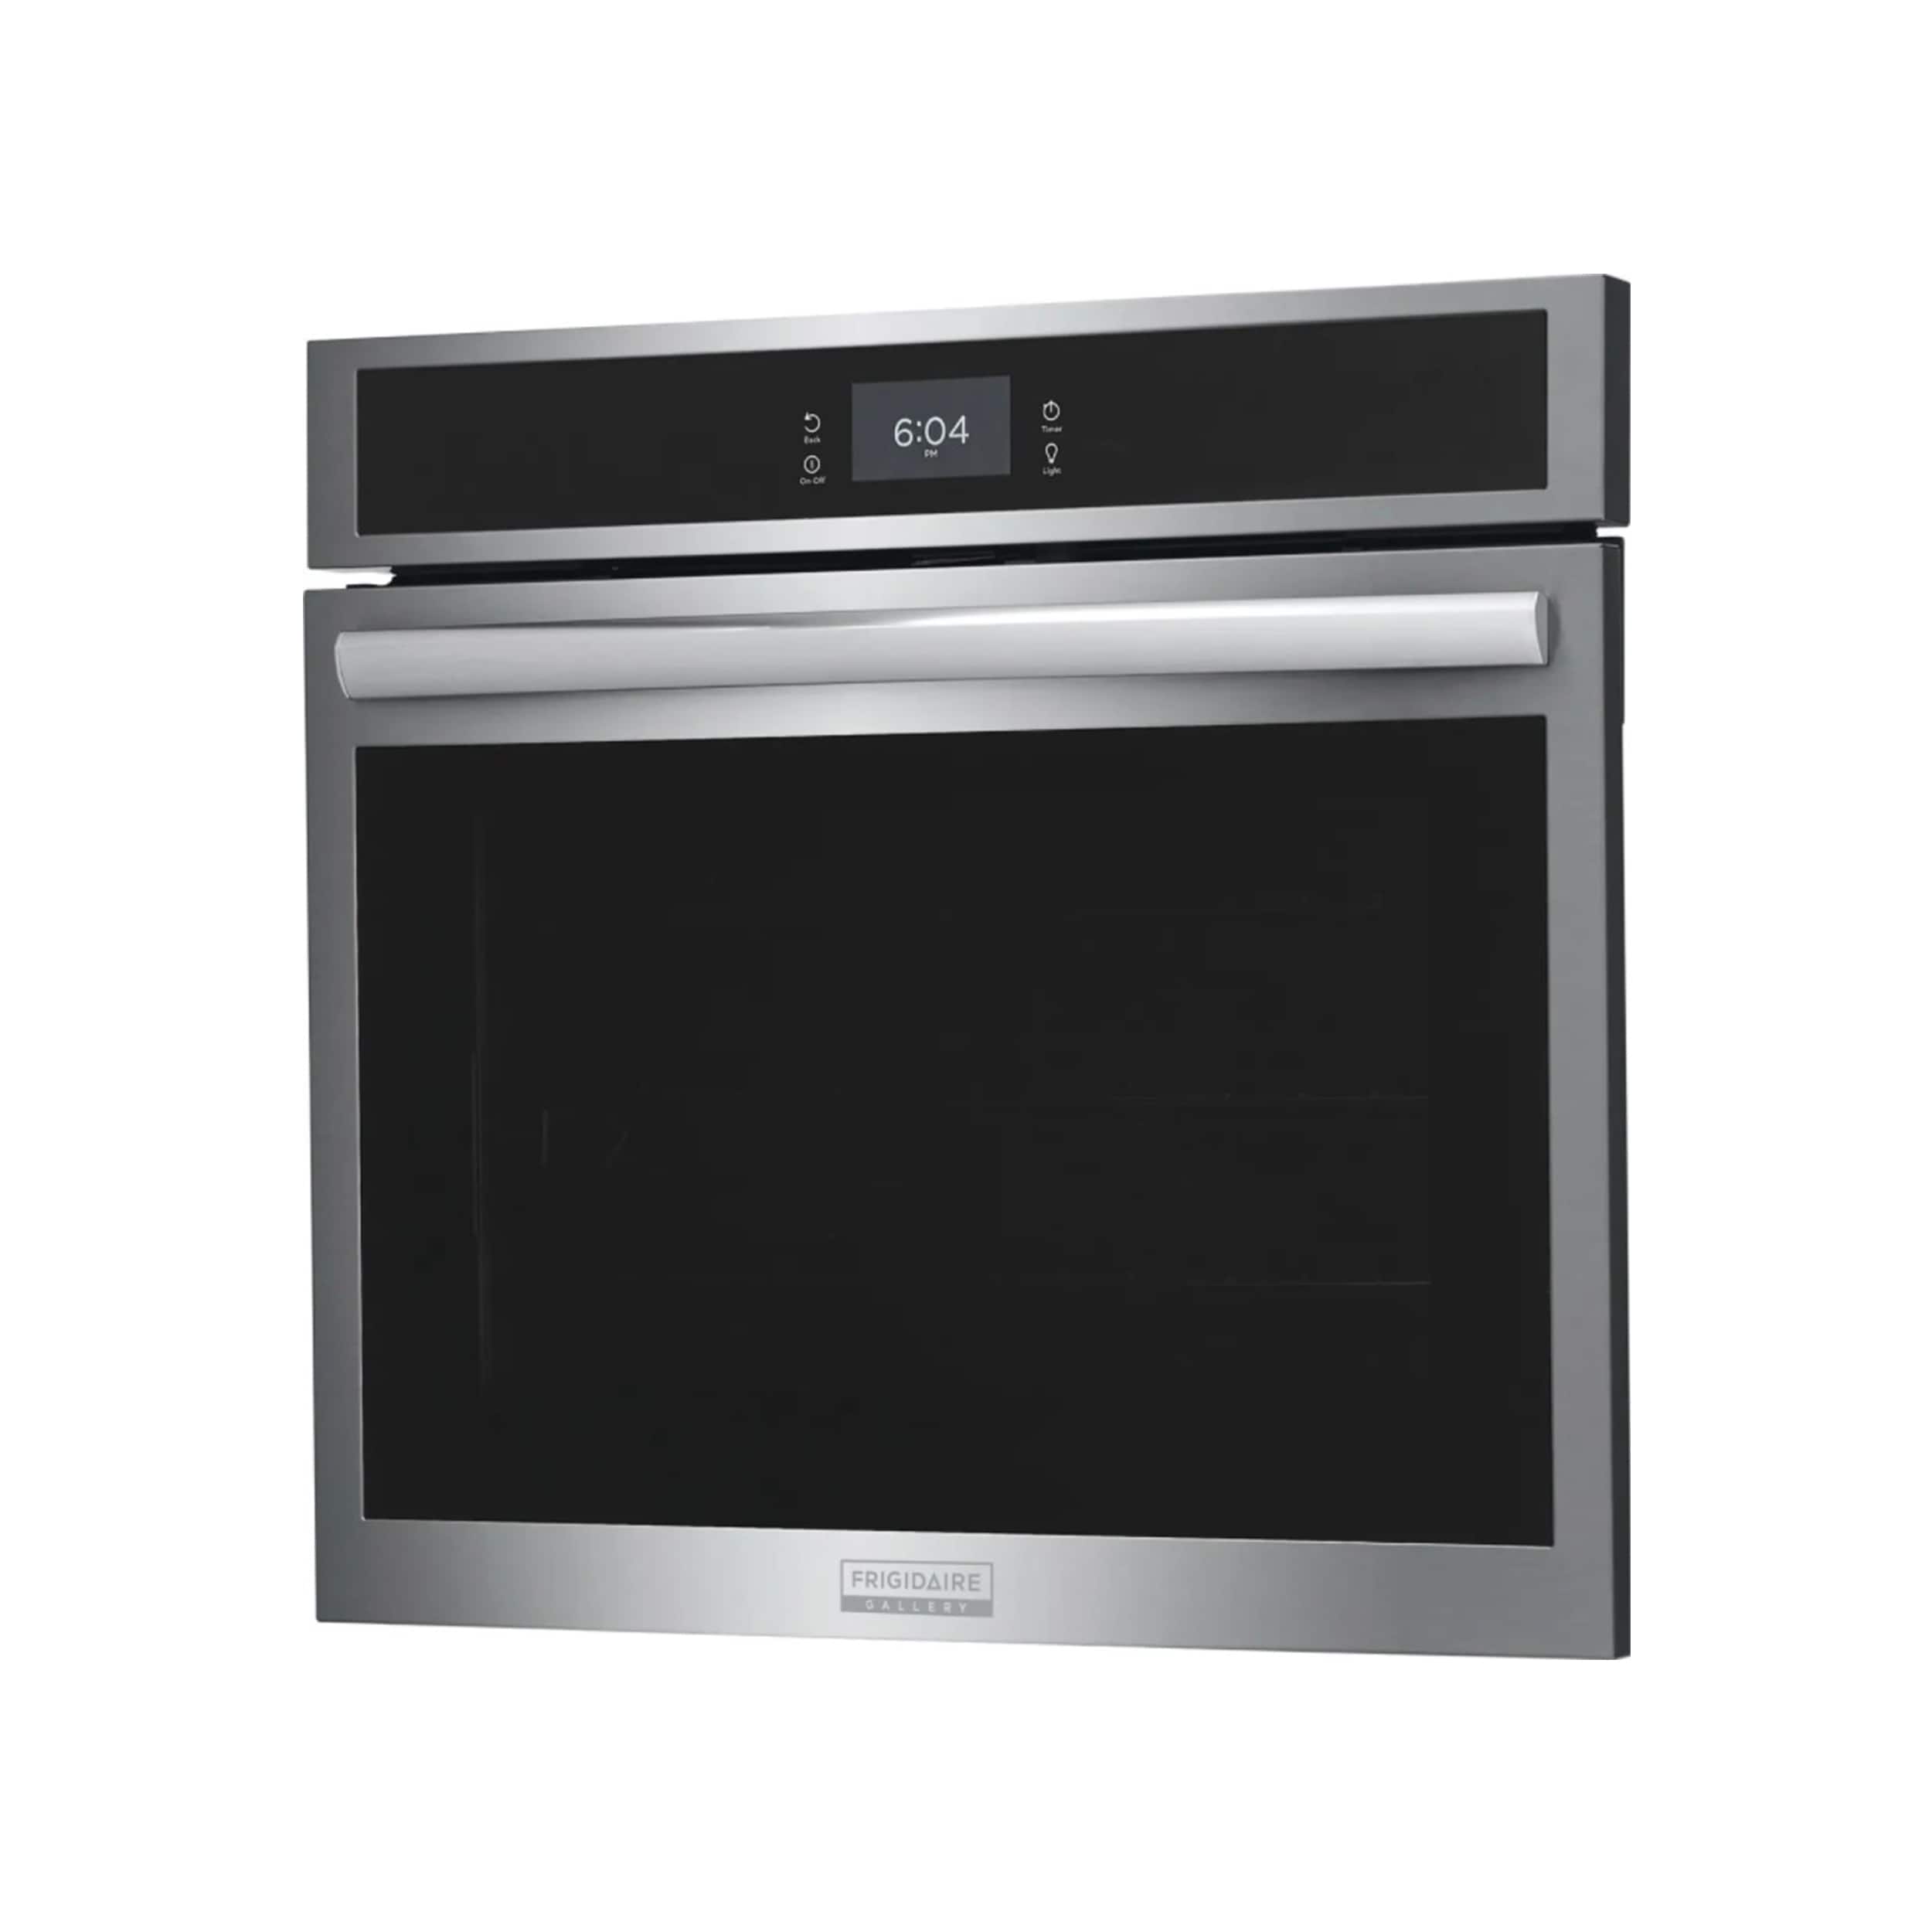 Frigidaire 30 inch S inchgle Electric Wall Oven with Total Convection